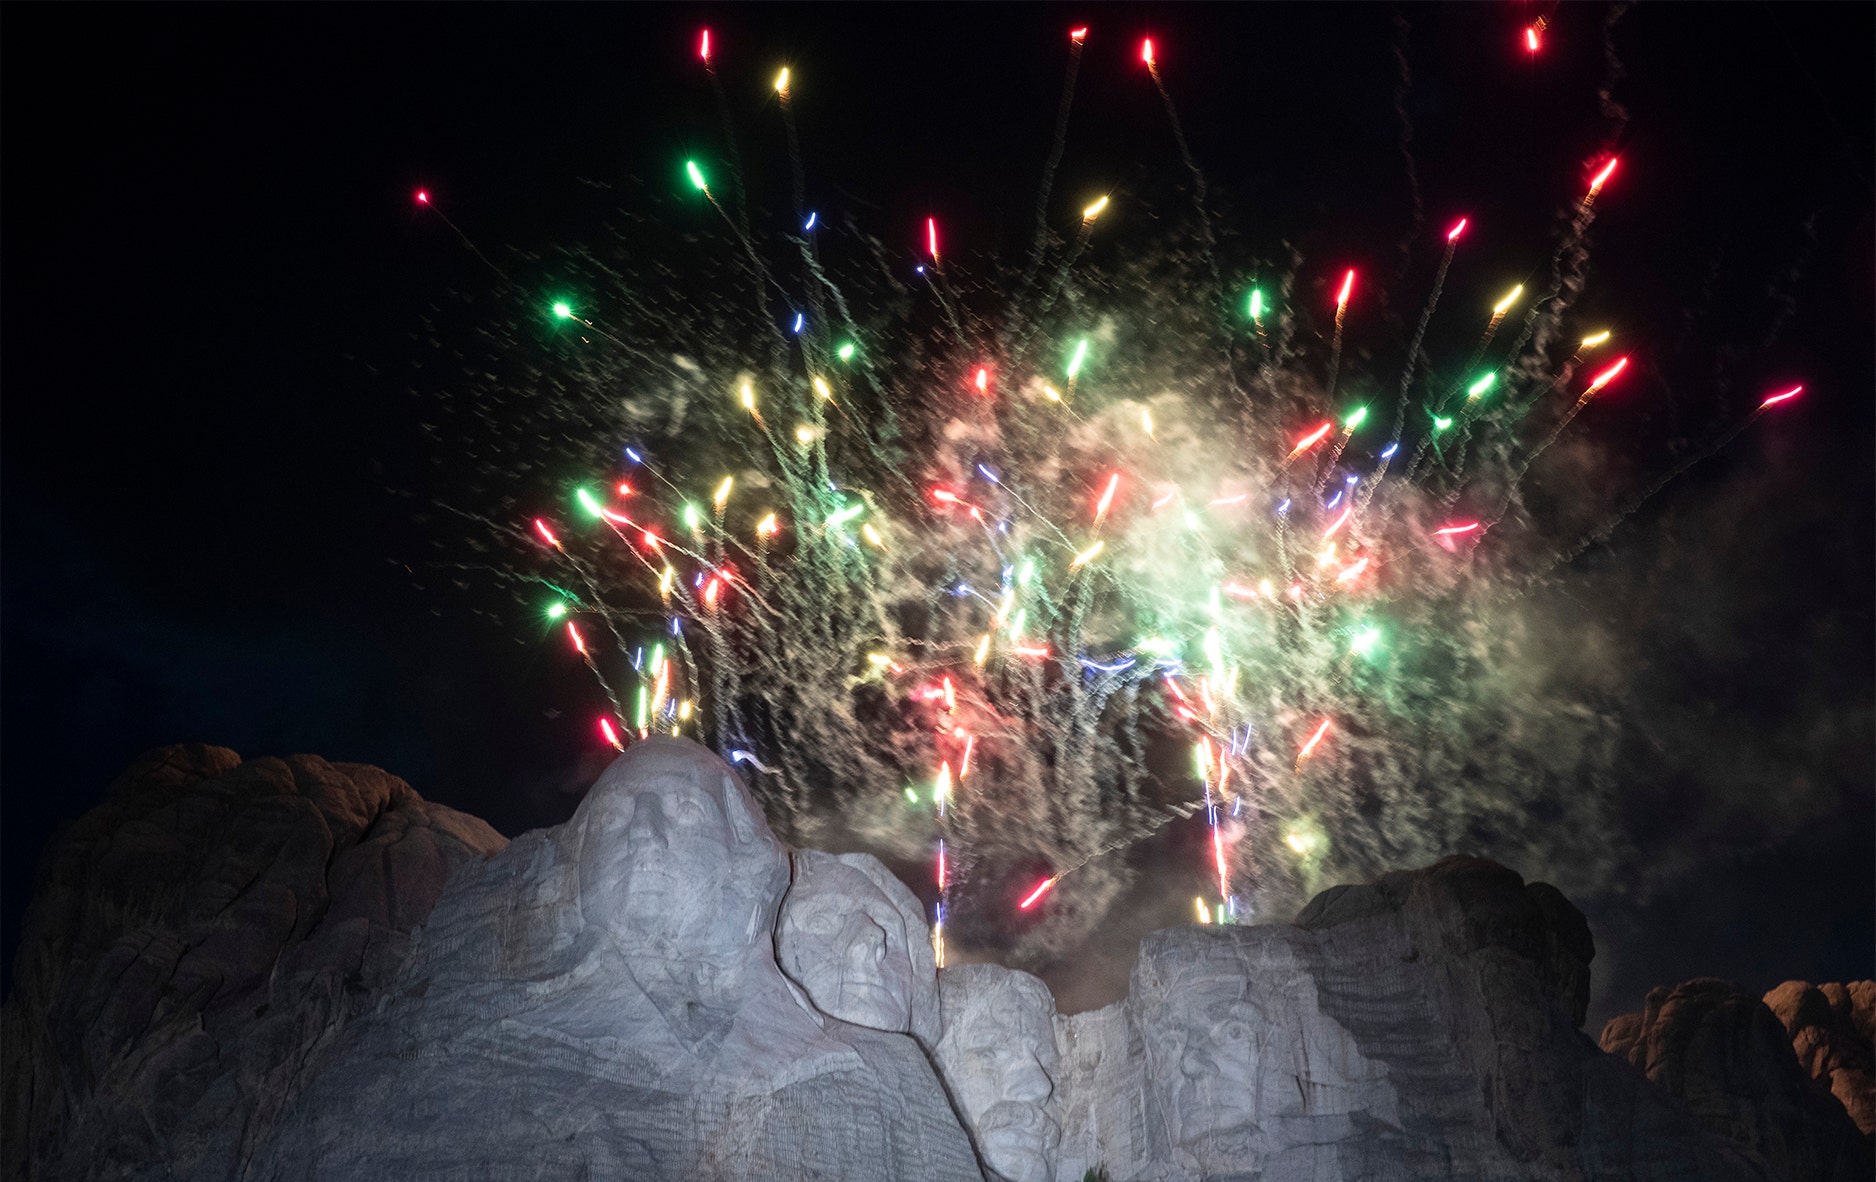 South Dakota request for July 4th fireworks at Mount Rushmore denied by National Park Service